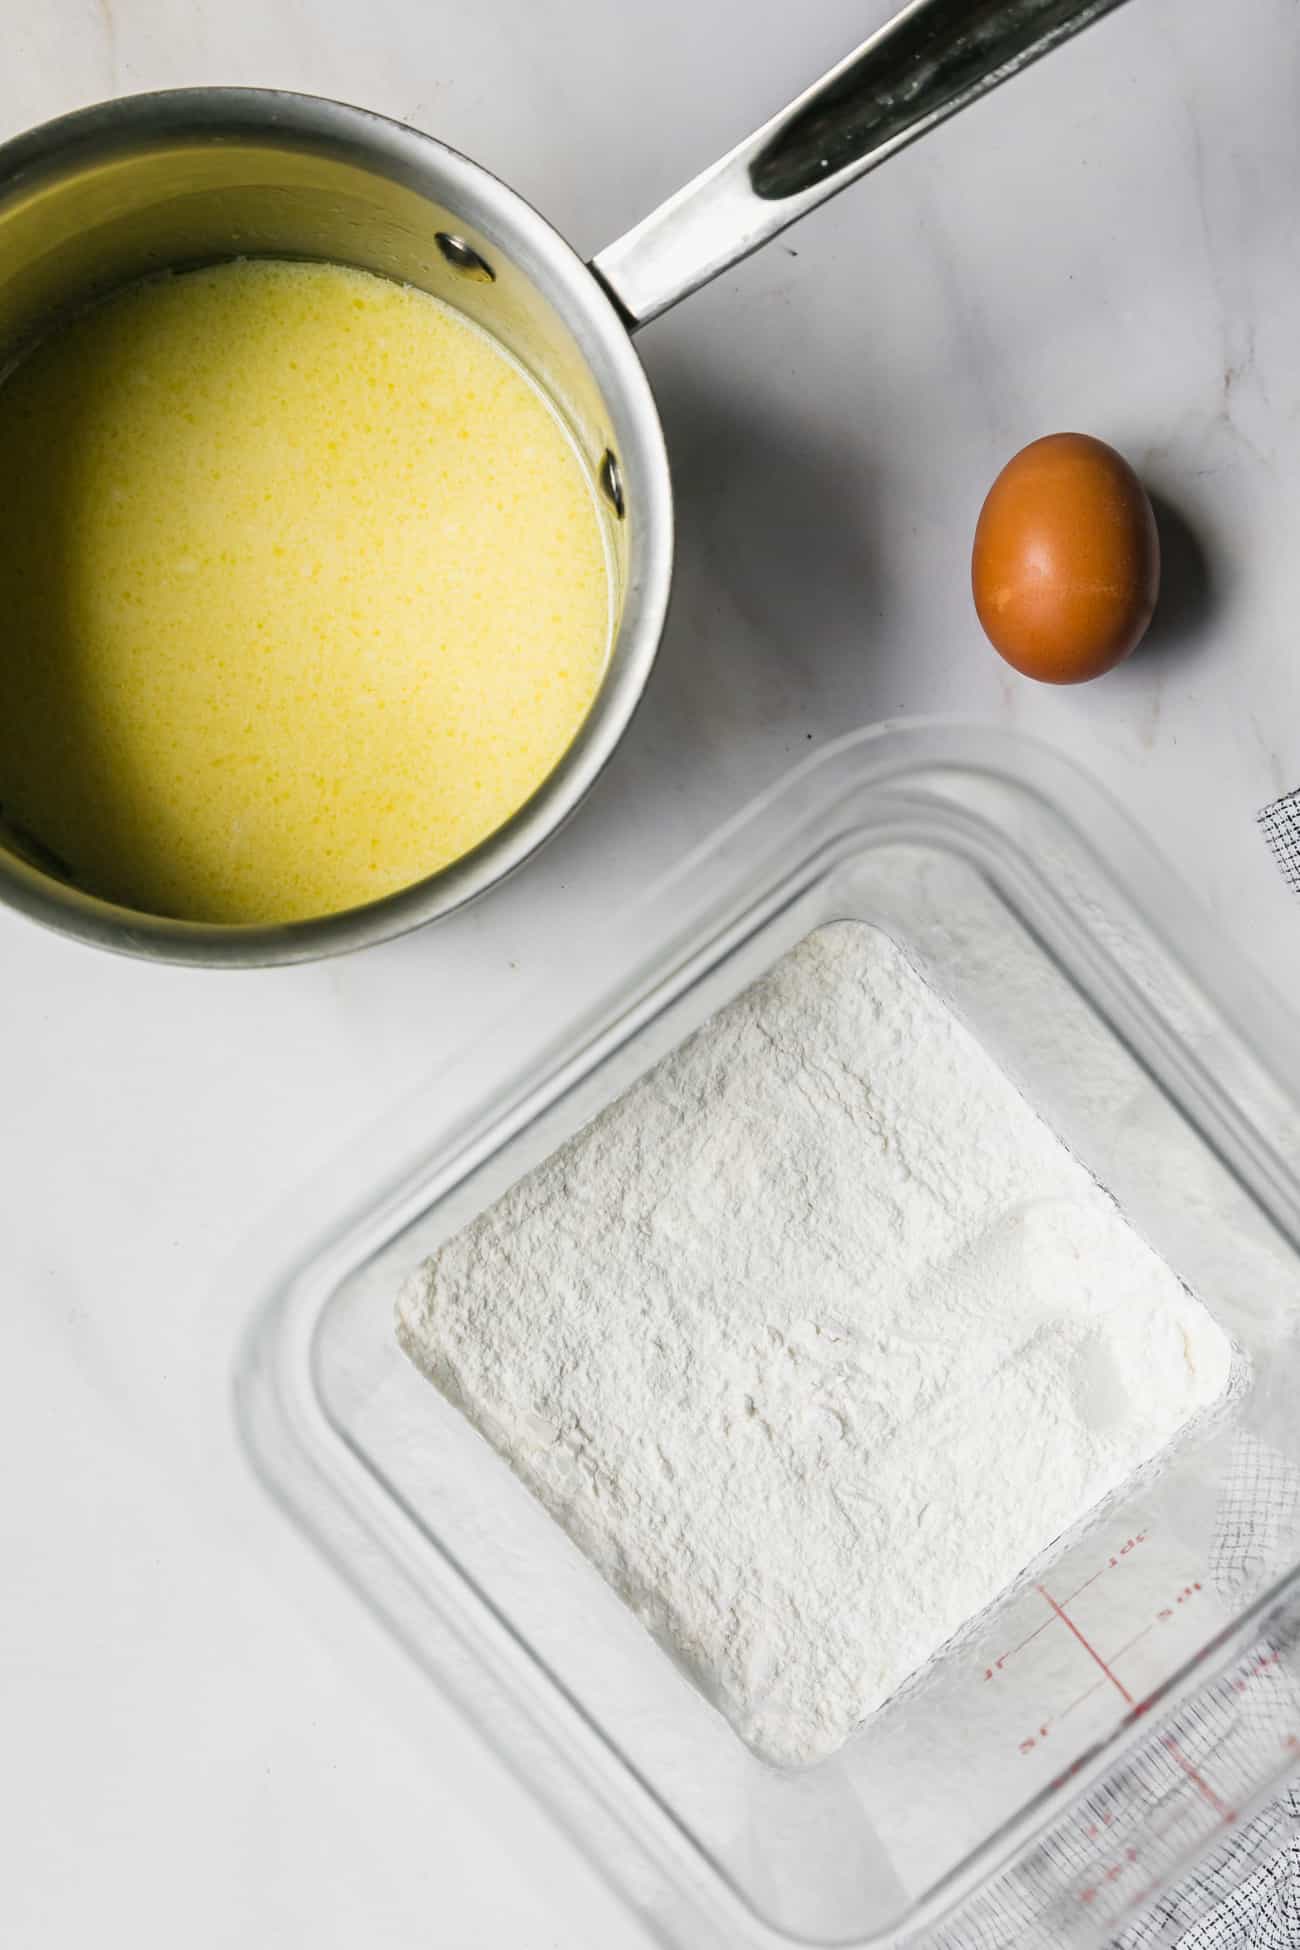 ingredients prepped to make 5 ingredient pizza dough: a saucepan, clear square bin with flour and an egg